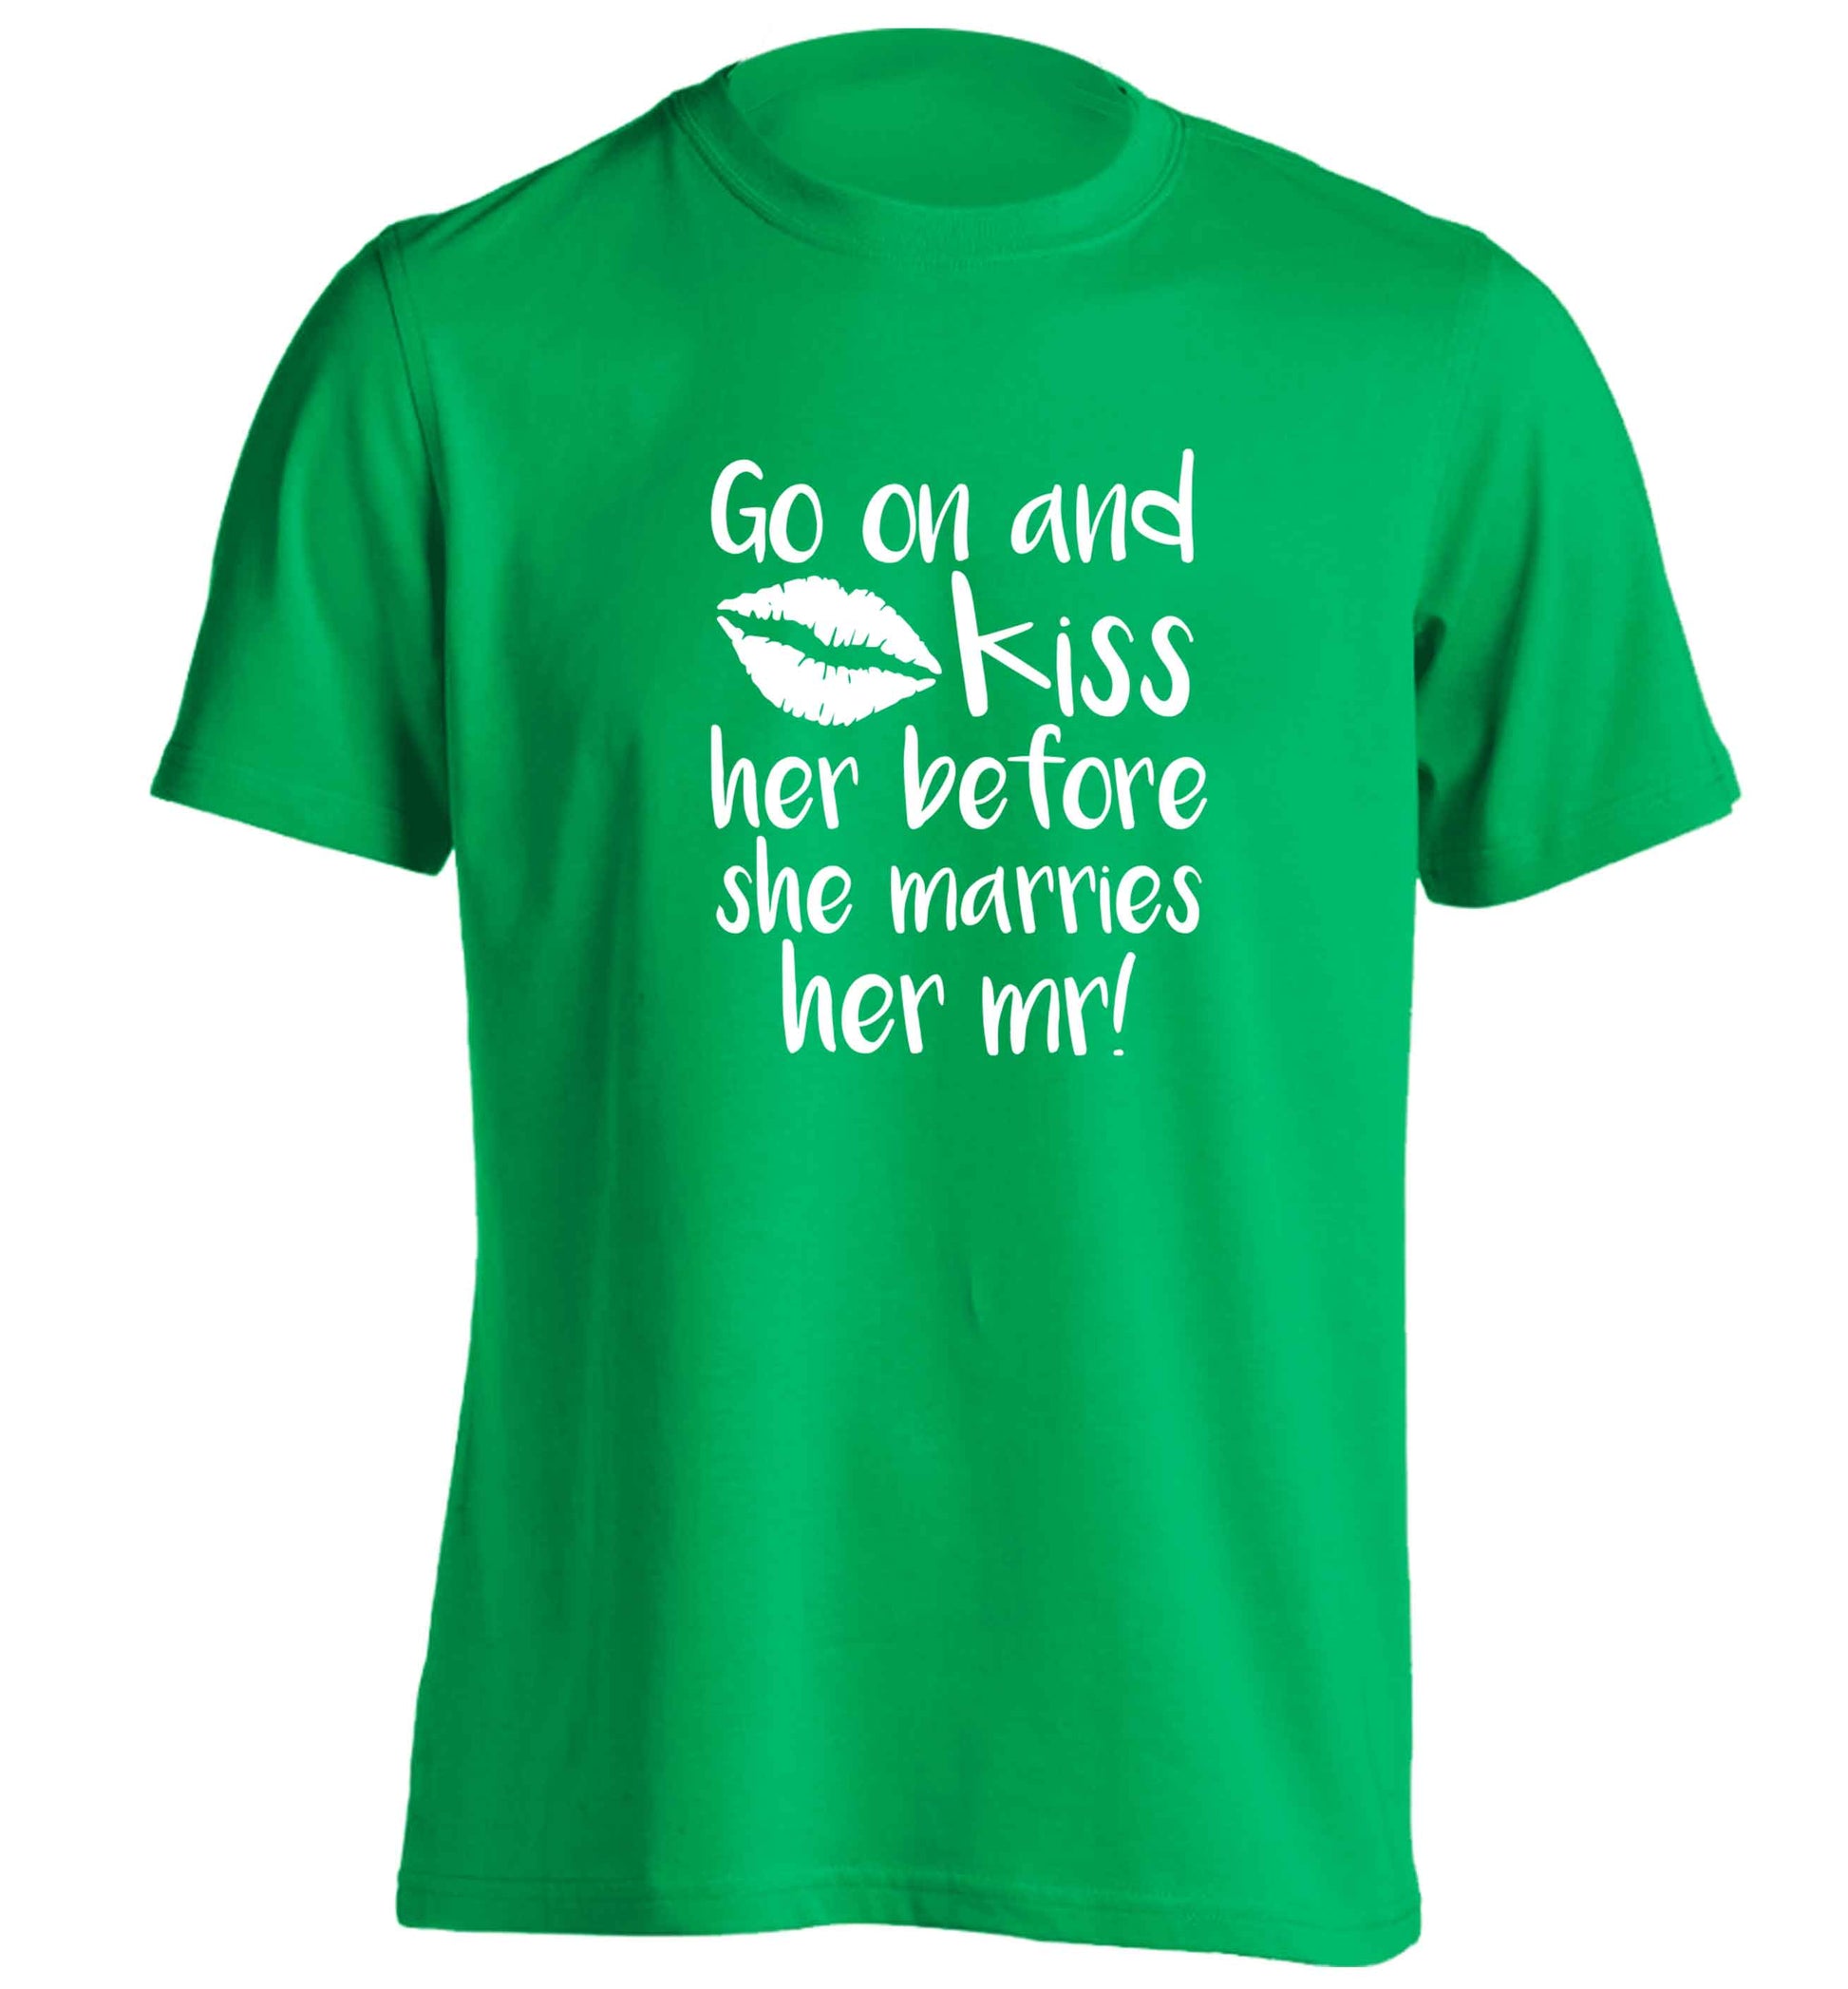 Kiss her before she marries her mr! adults unisex green Tshirt 2XL